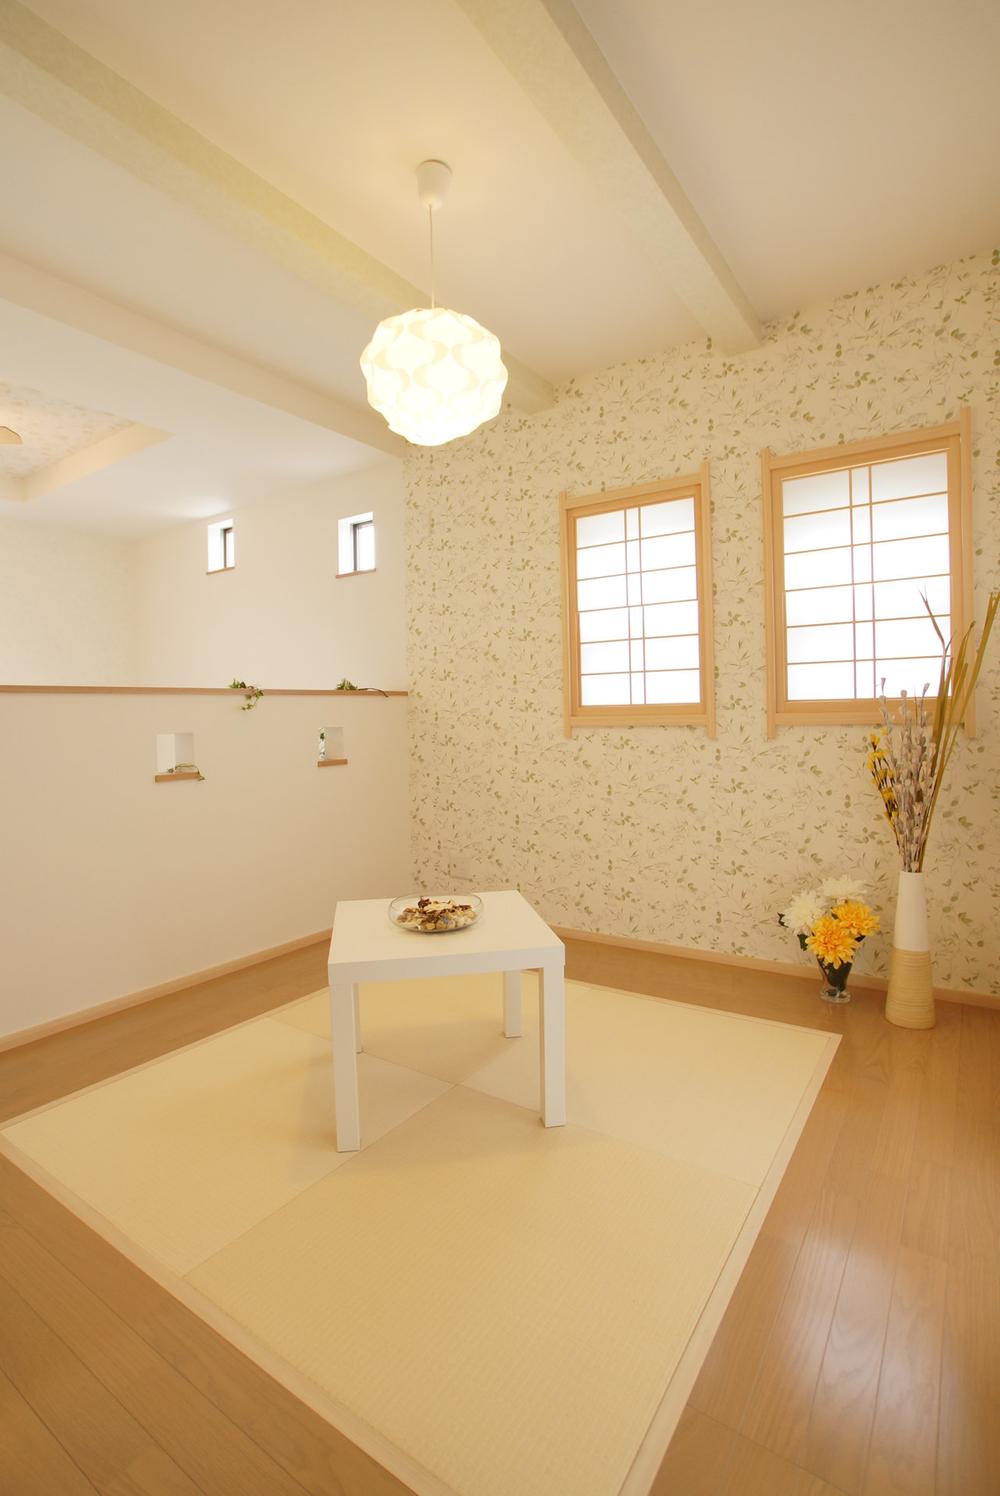 Same specifications photos (Other introspection). Japanese-style room! ?